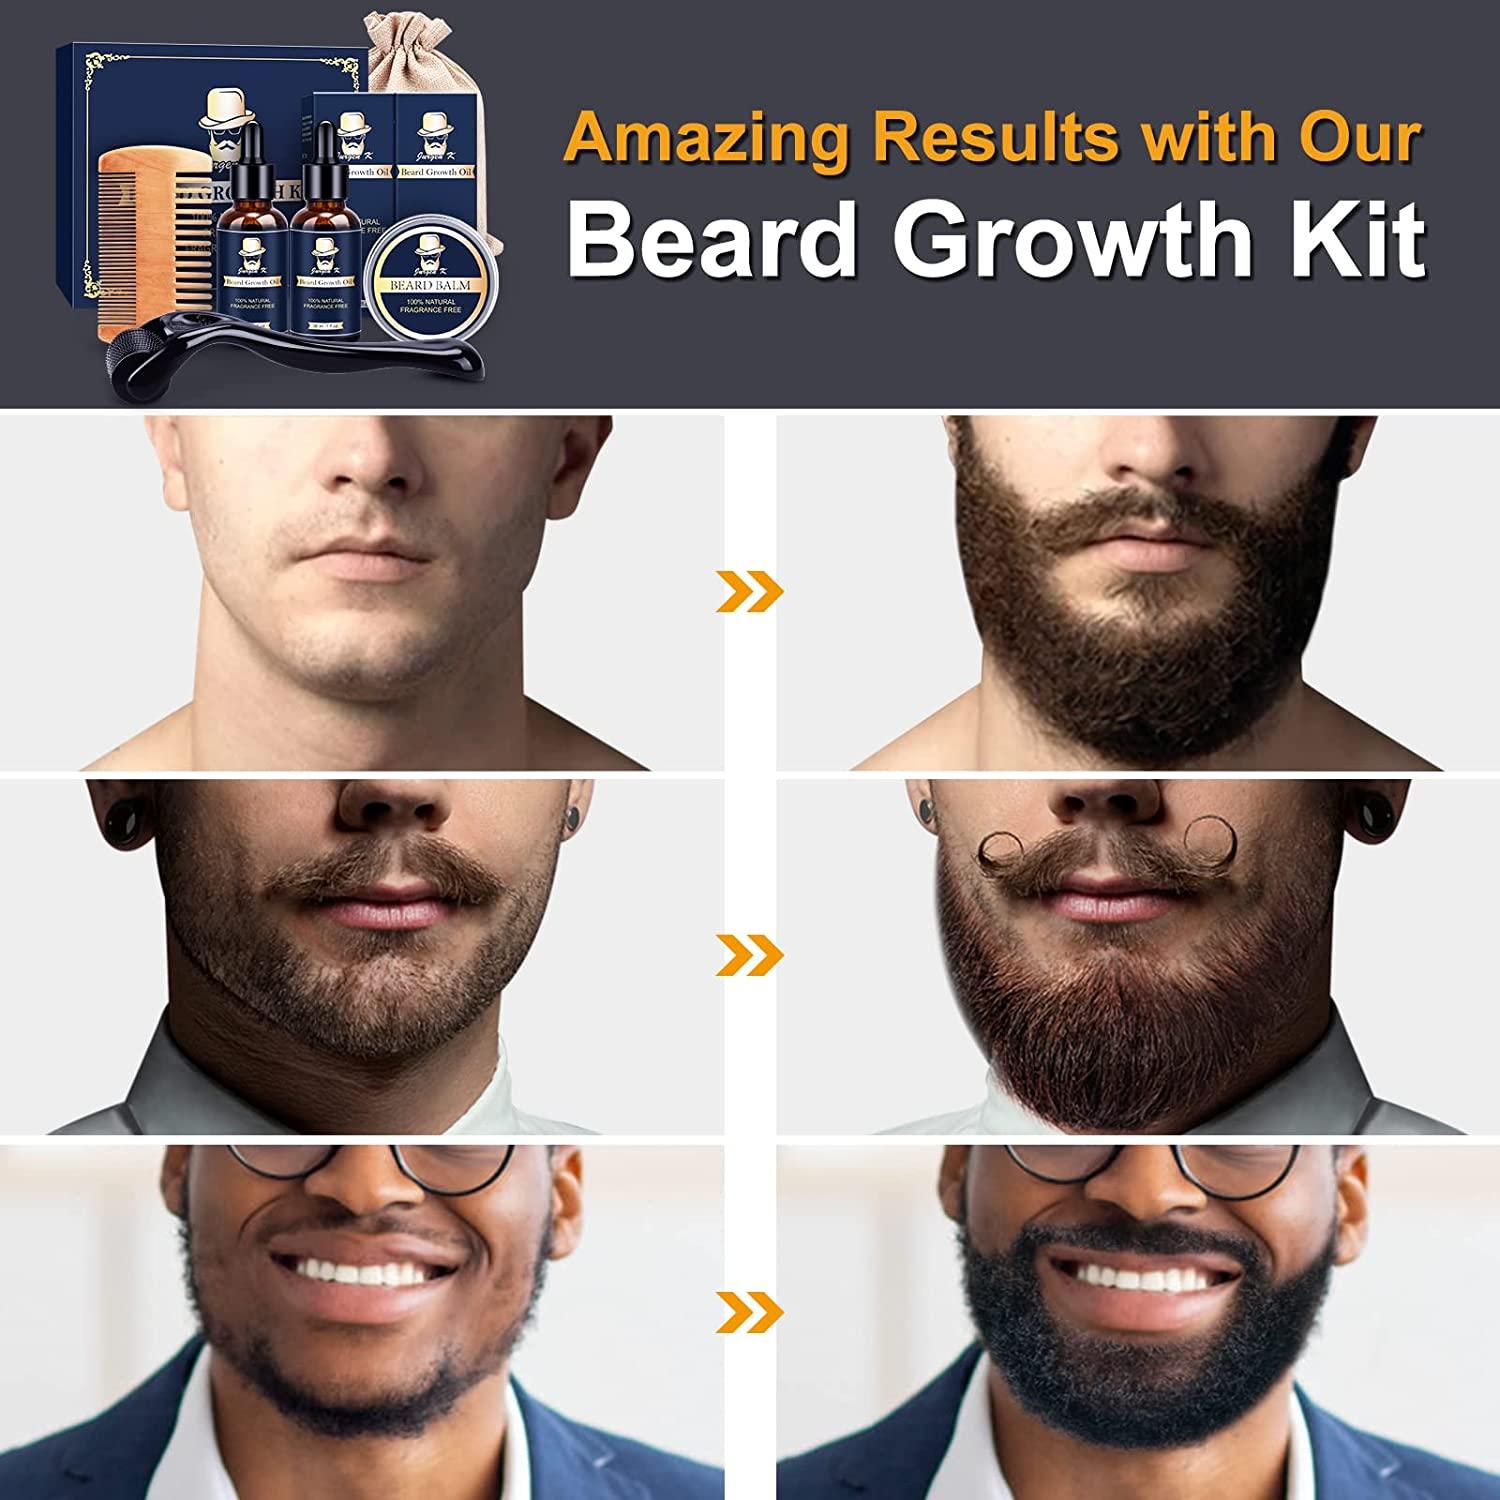 Beard Growth Kit - Derma Roller for Beard Growth, Beard Kit with Beard  Growth Oil, Beard Balm, Comb, Facial Hair Growth Products for Patchy Beard,  Birthday Gifts for Men Husband Dad Boyfriend